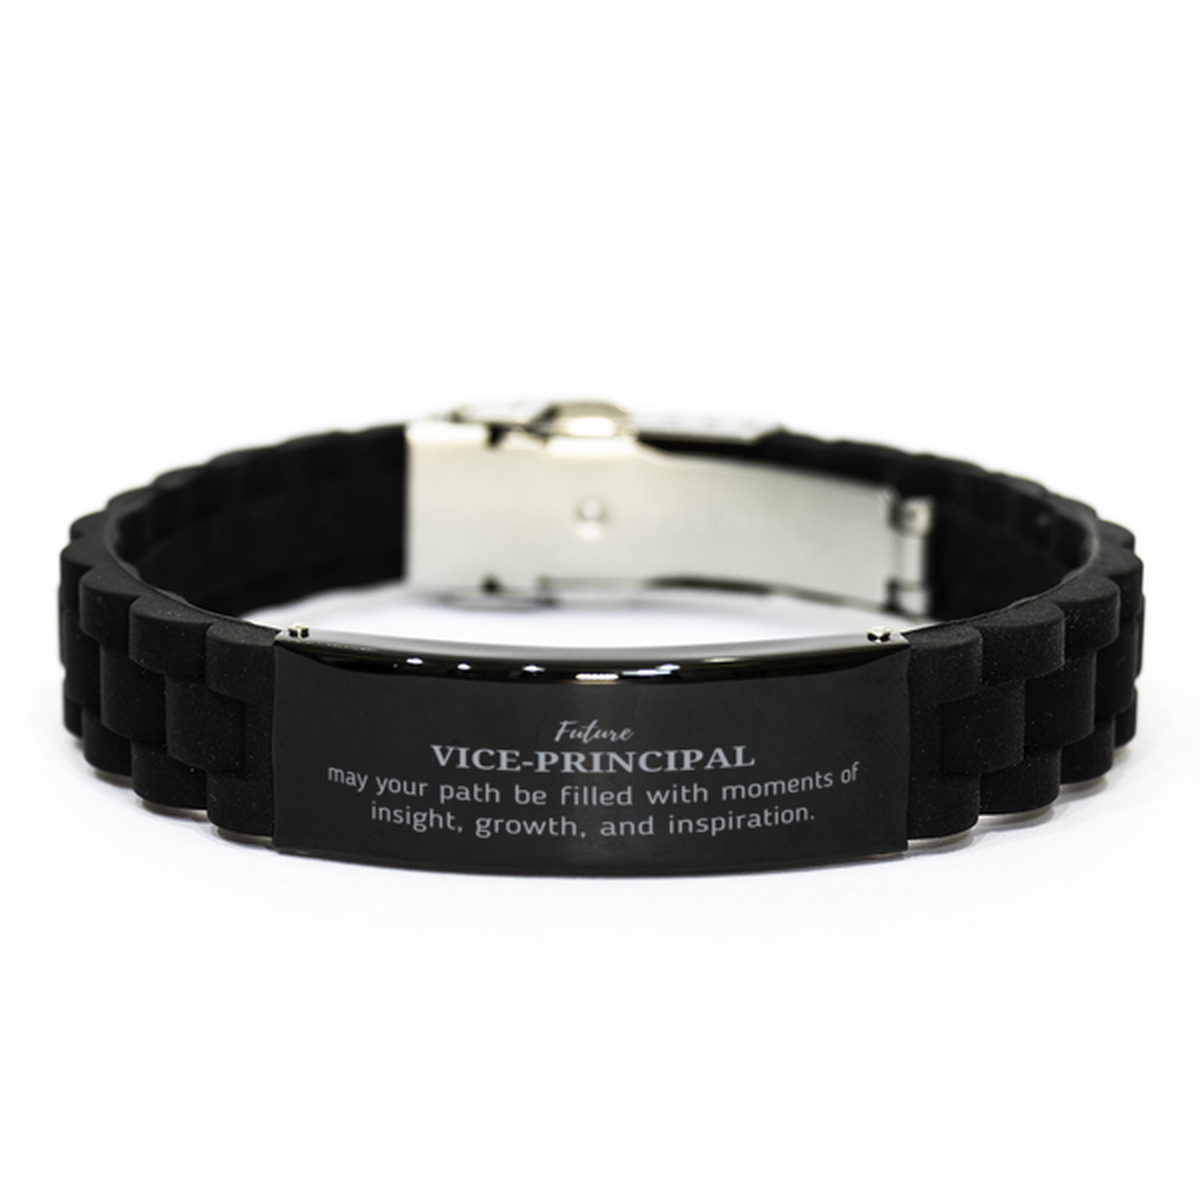 Future Vice-principal Gifts, May your path be filled with moments of insight, Graduation Gifts for New Vice-principal, Christmas Unique Black Glidelock Clasp Bracelet For Men, Women, Friends